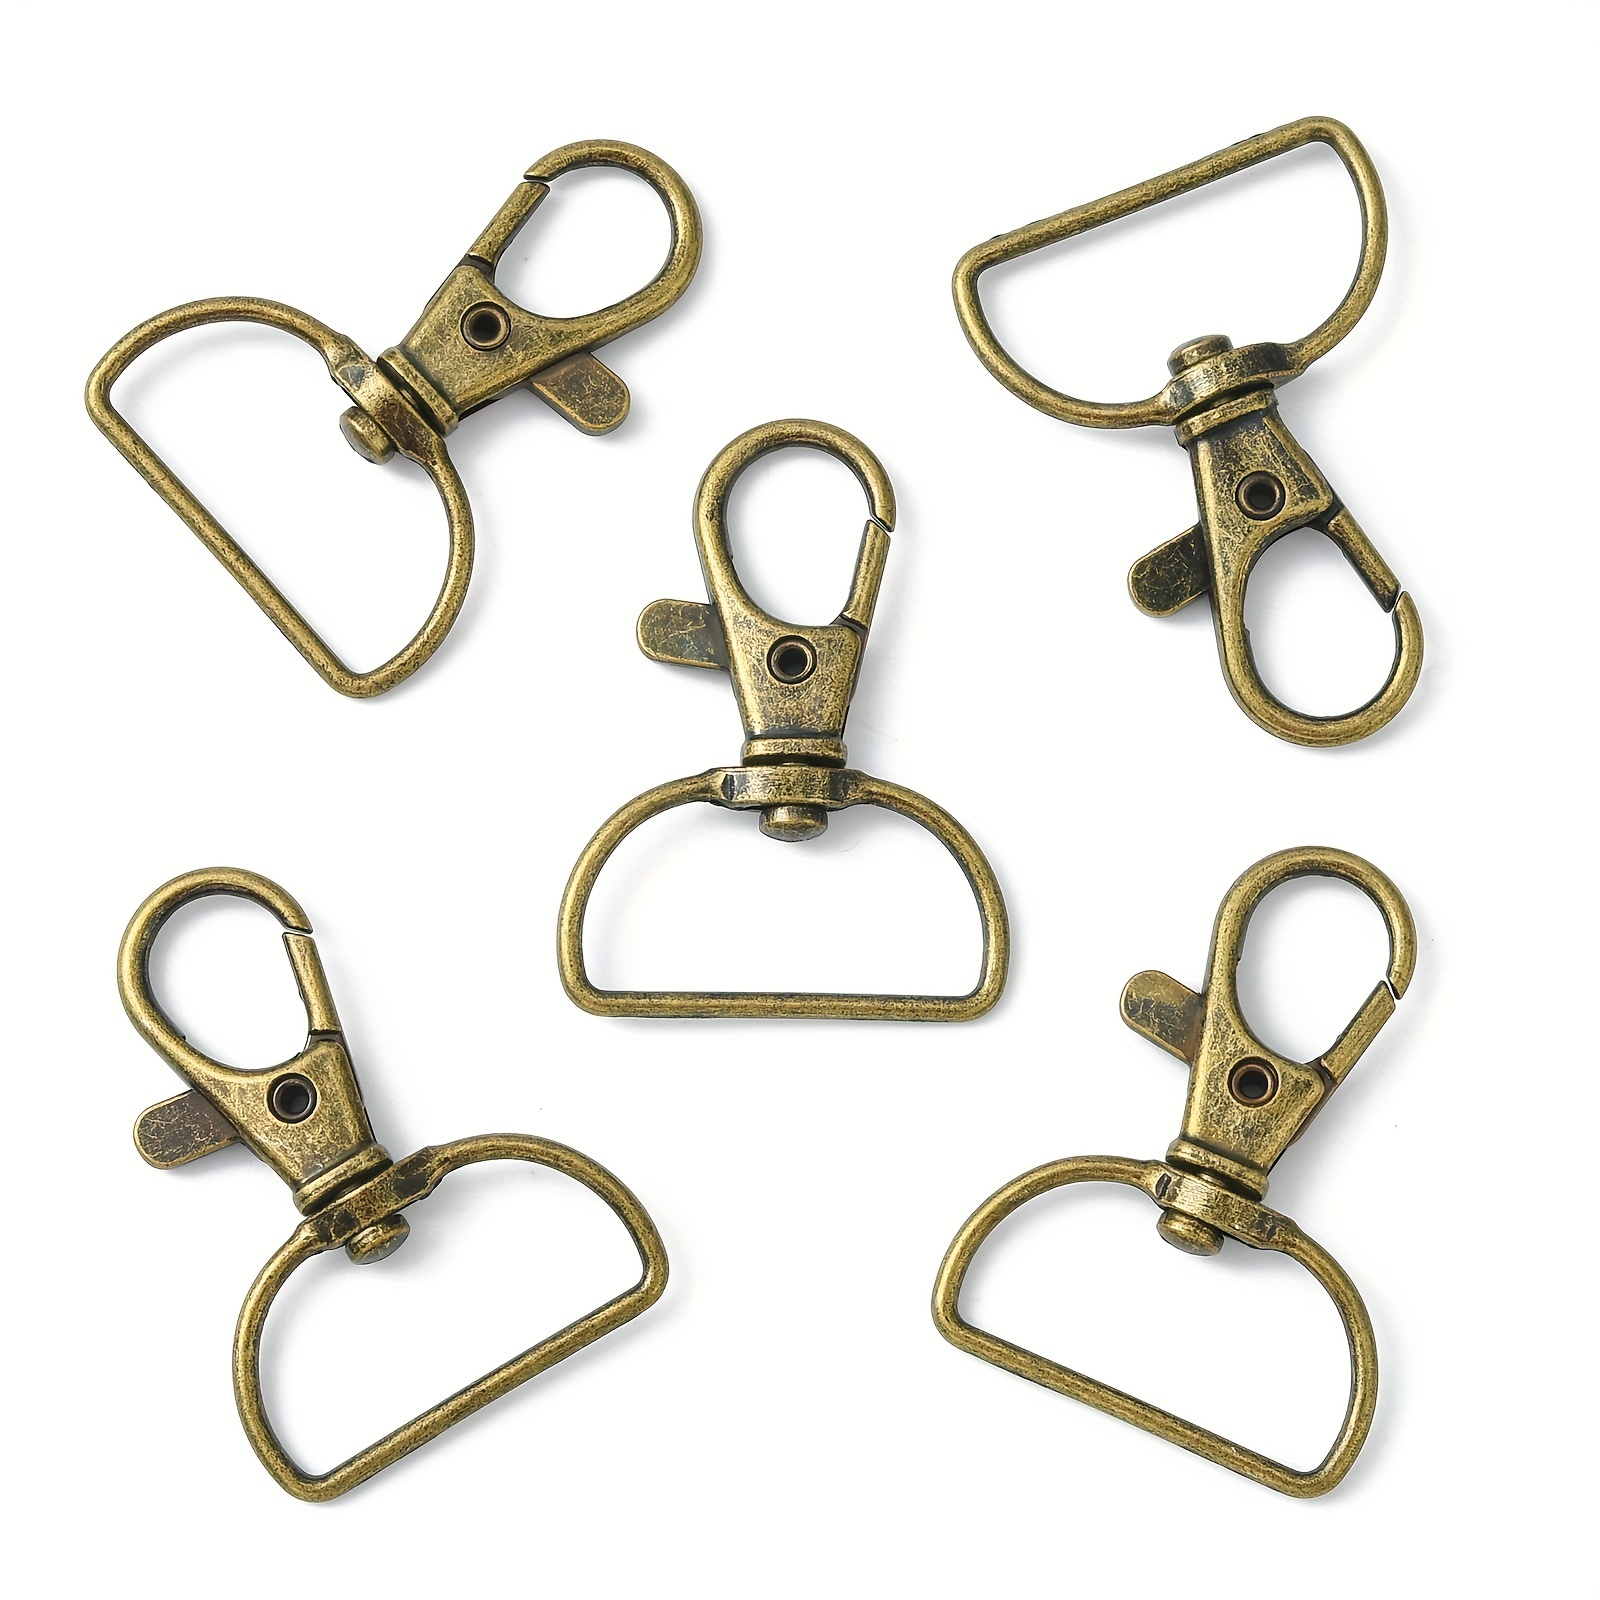 10Pcs Alloy Swivel Clasps Antique Bronze D Rings Metal Lobster Clasps Bulk  For DIY Crafts Keychain Jewelry Making Purse Bag Making Hardware Accessorie